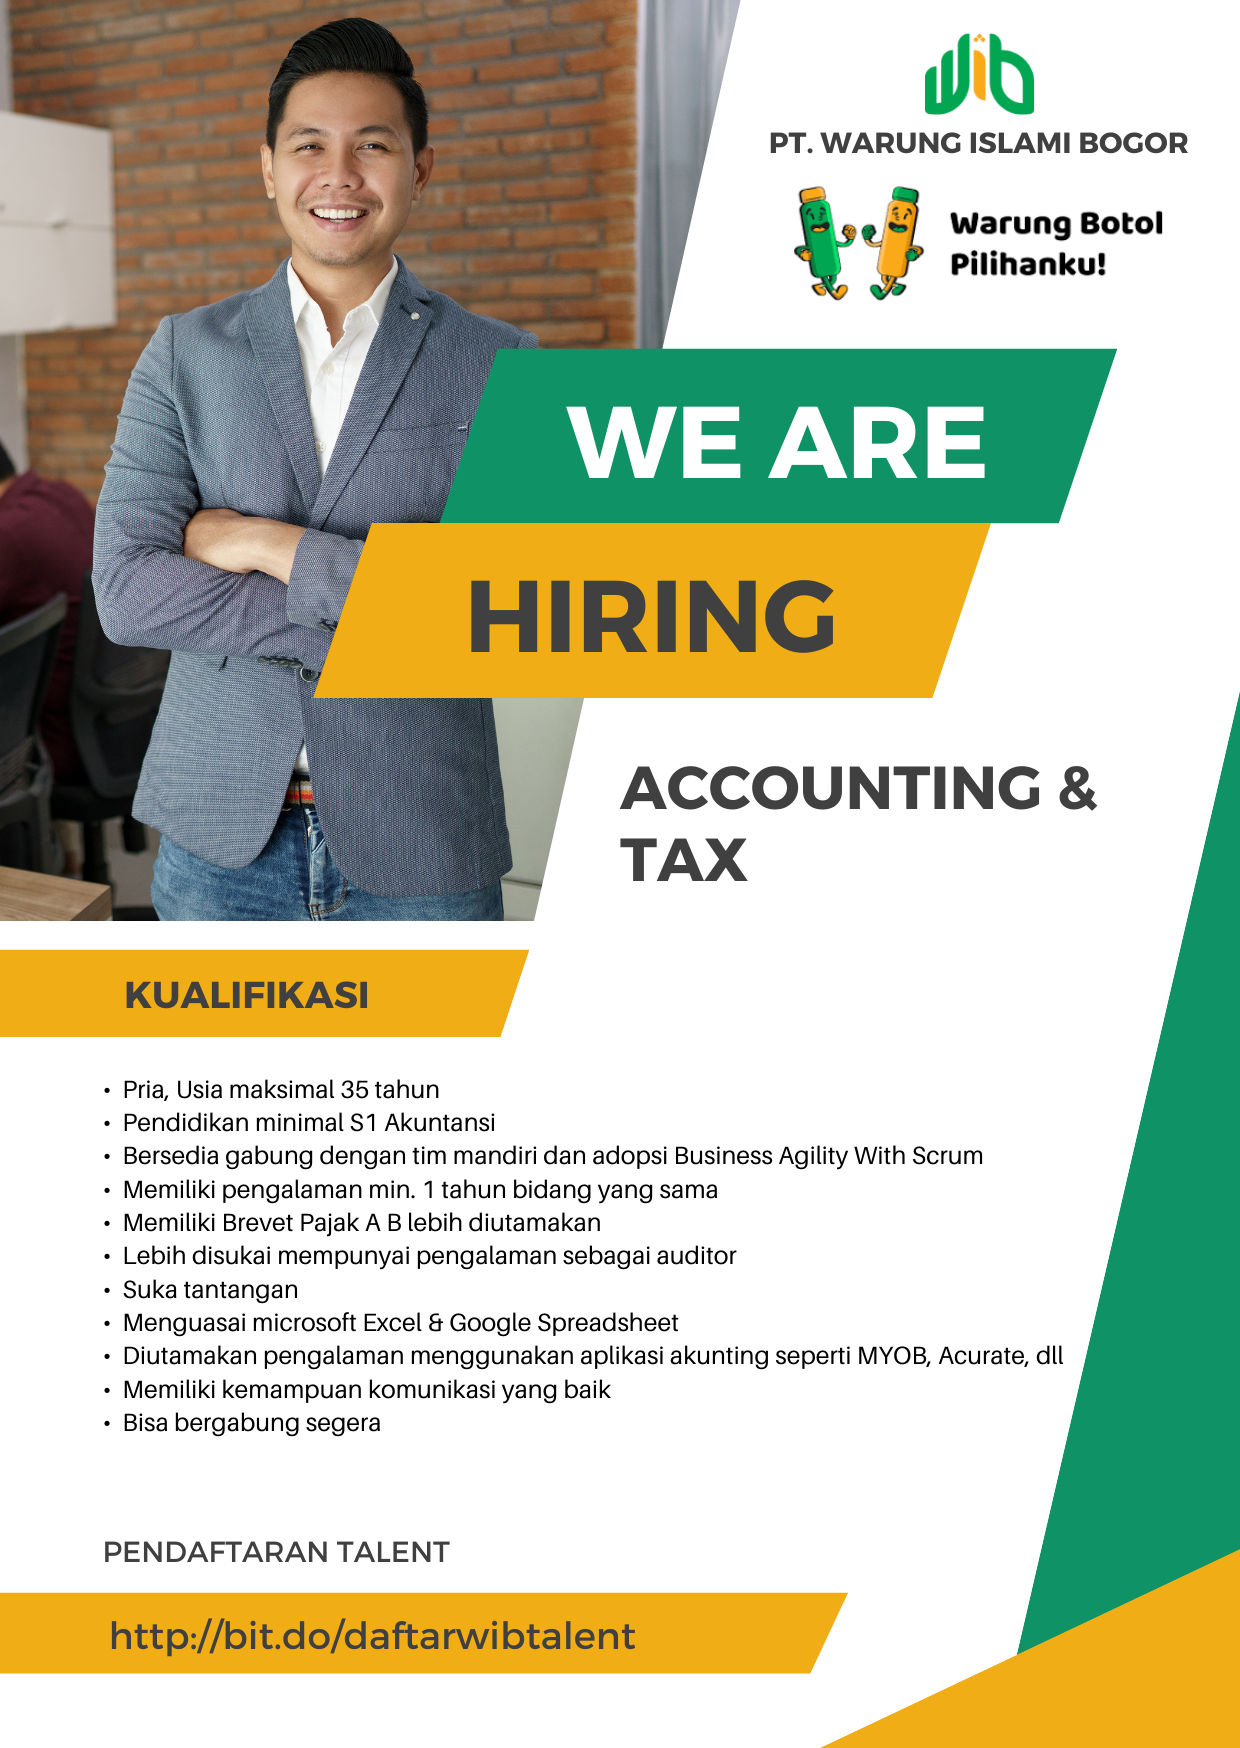 We Are Hiring Accounting & Tax